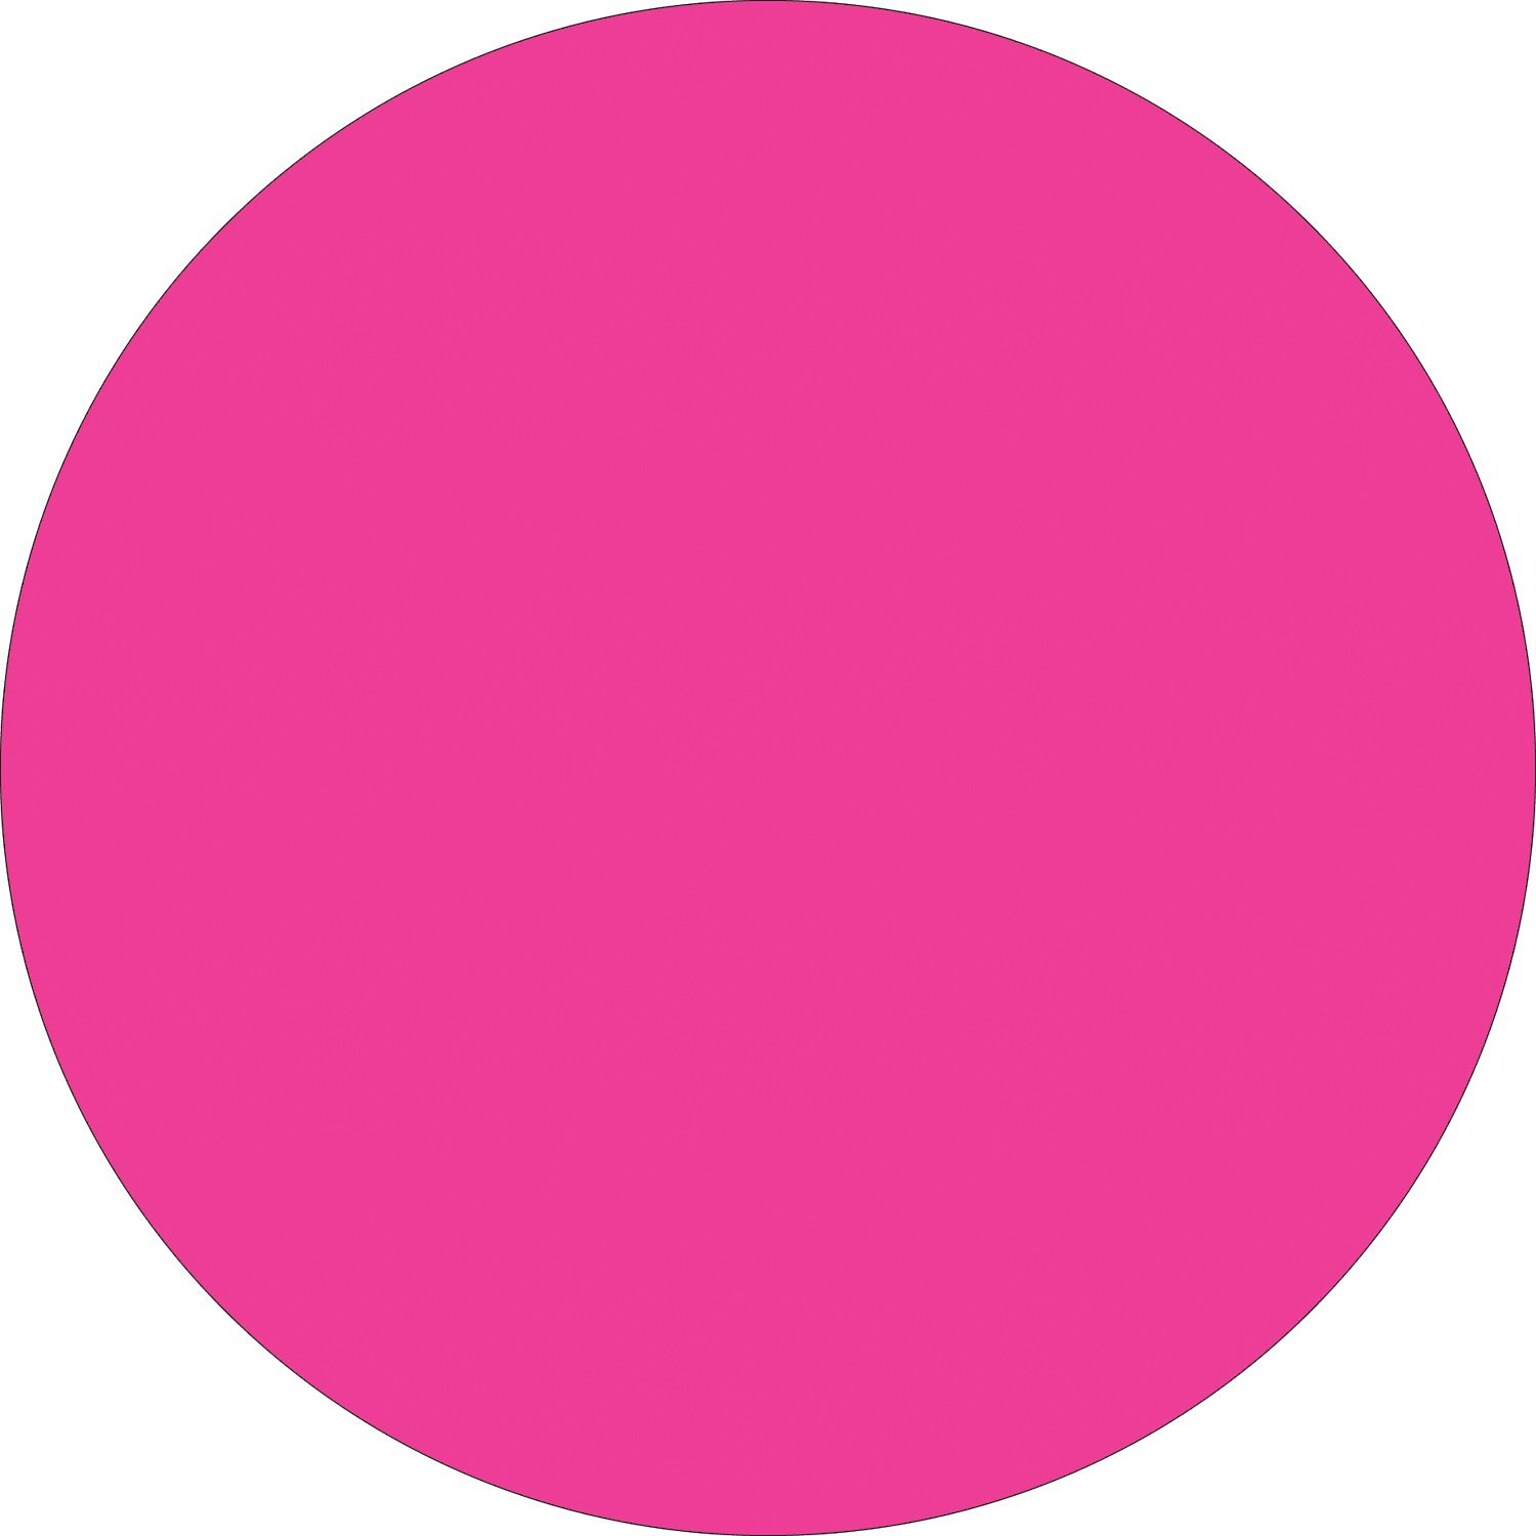 Tape Logic 2 Circle Inventory Label, Fluorescent Pink, 500/Roll